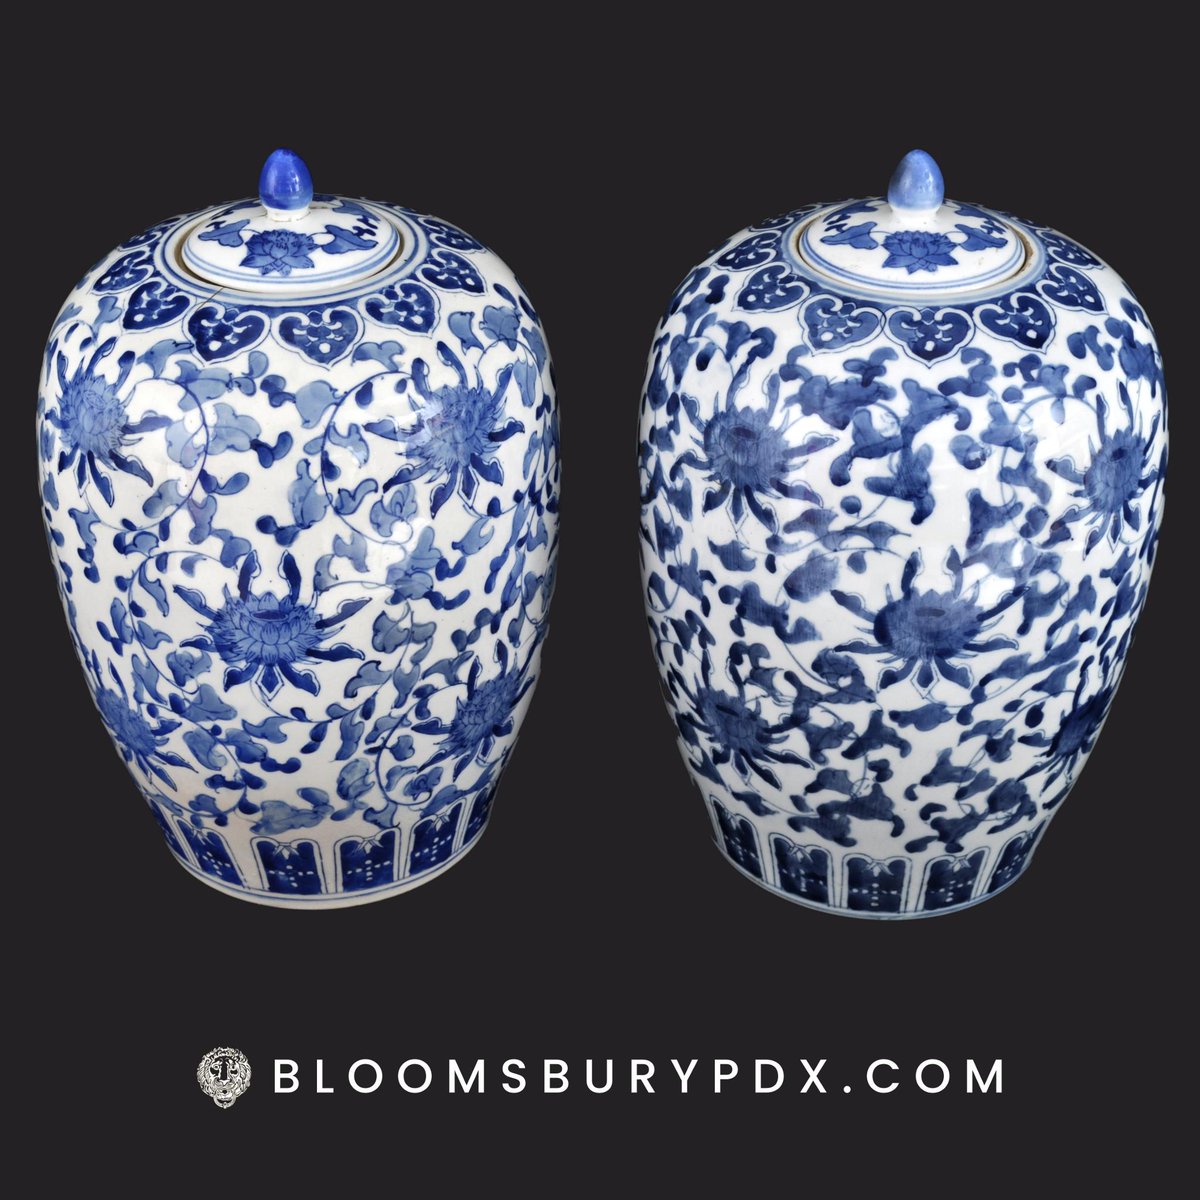 Pair of Antique Chinese Qing Dynasty Blue and White Porcelain Melon Jars, c. 1900
  
bloomsburypdx.com/collections/ce…
  
#antique #chinese #qingdynasty #blueandwhite #porcelain  #antiques #antiqueporcelain #antiqueceramics #chineseporcelain #chineseart #ceramics #pottery #interiors #pdx